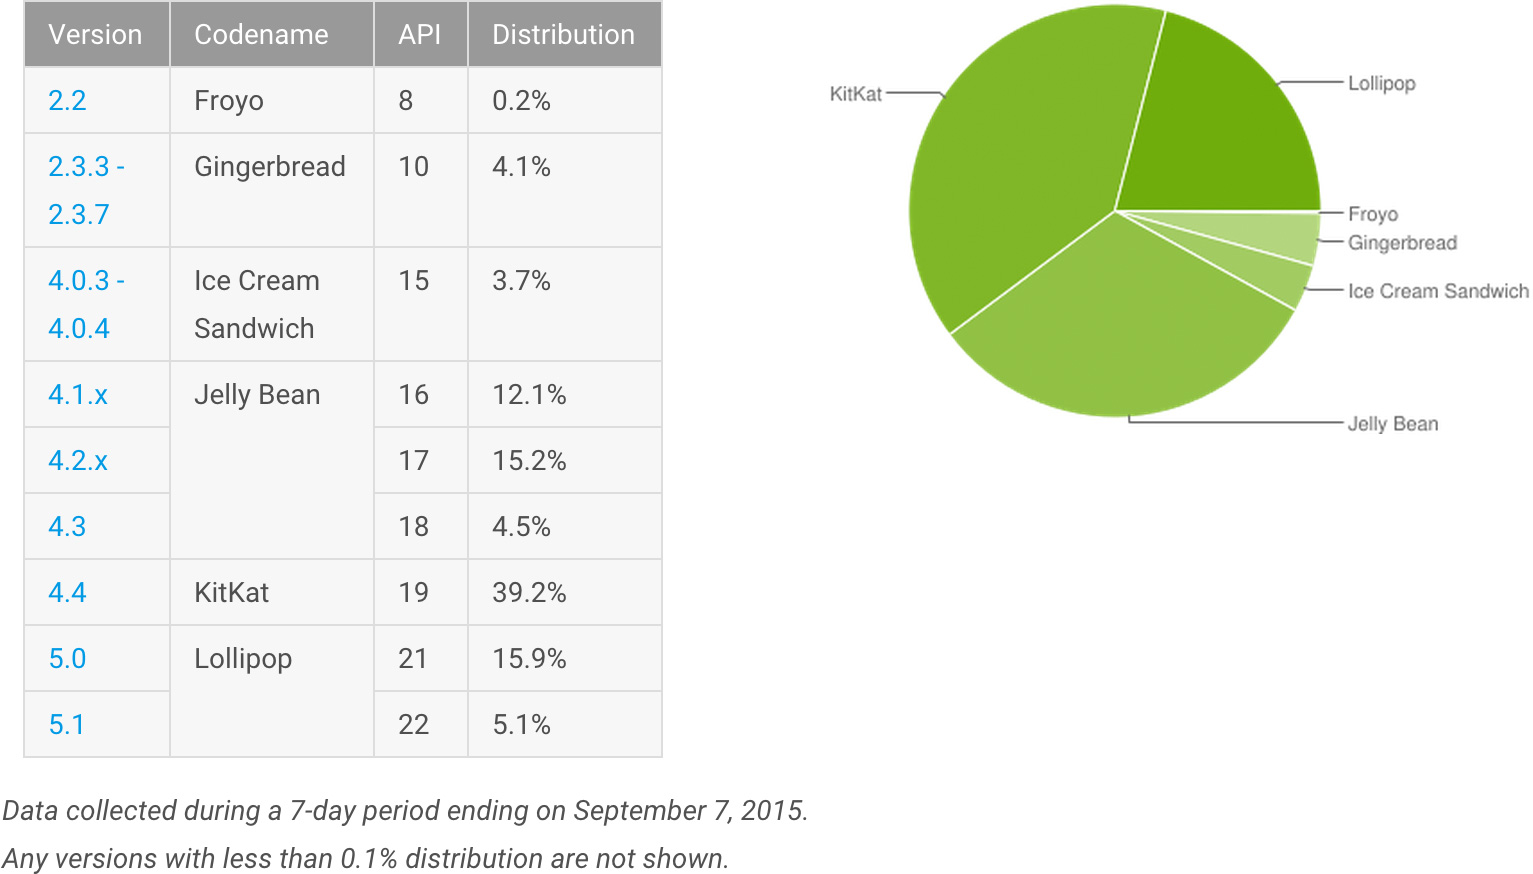 Adoption of Android versions